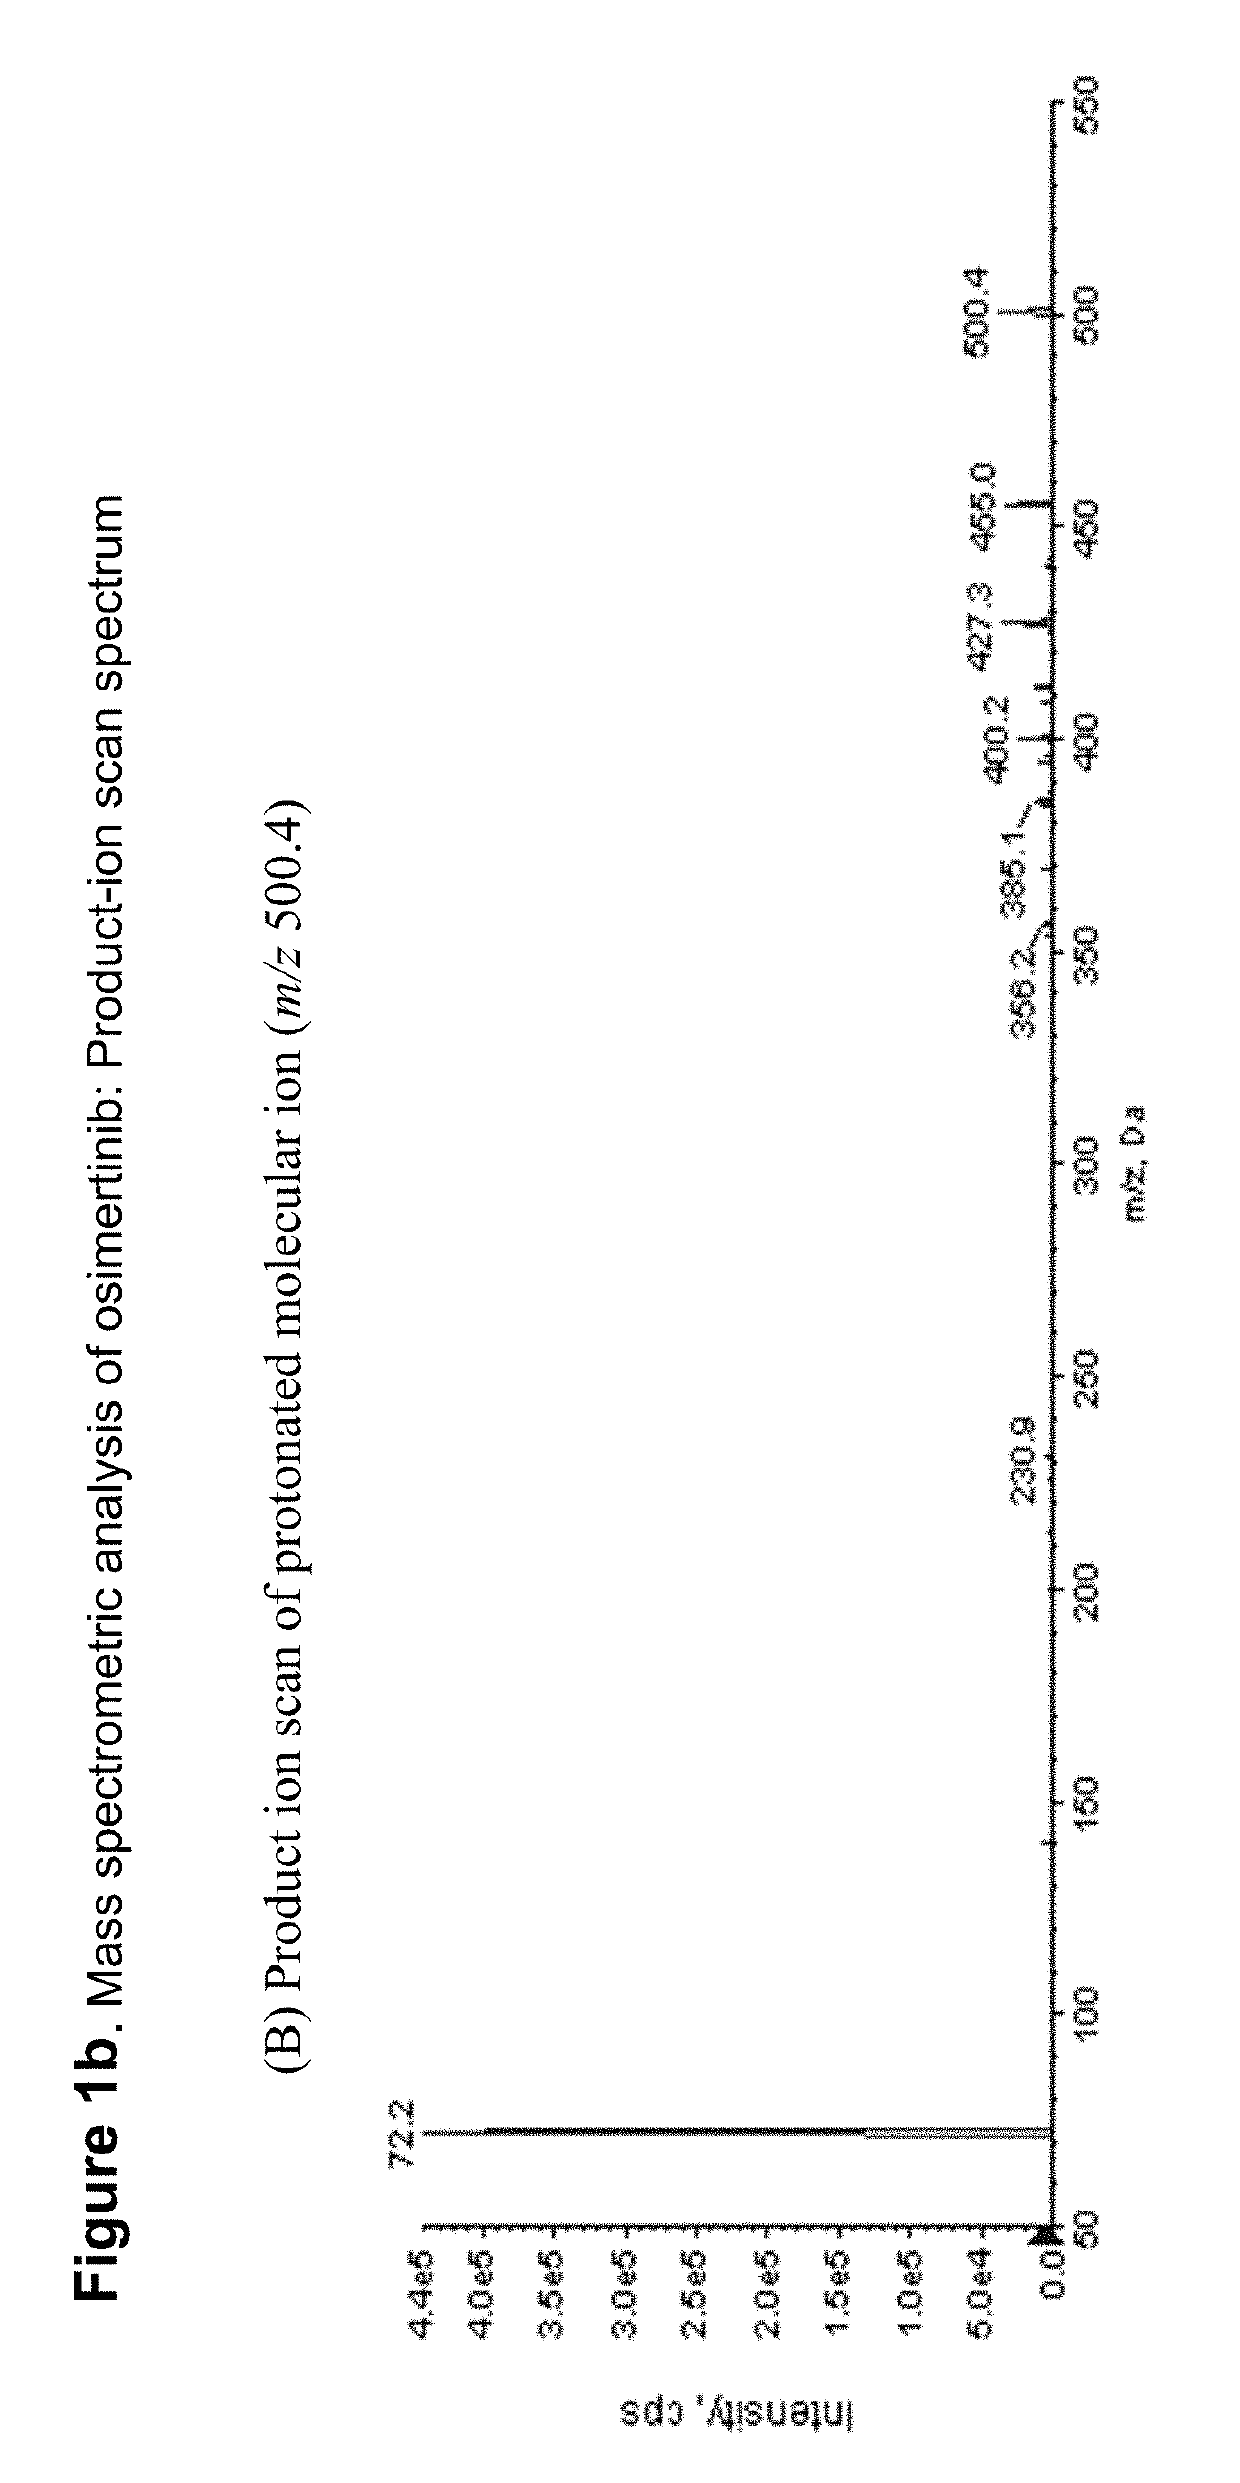 Fluorine- and/or deuterium-containing compounds for treating non-small cell lung cancer and related diseases